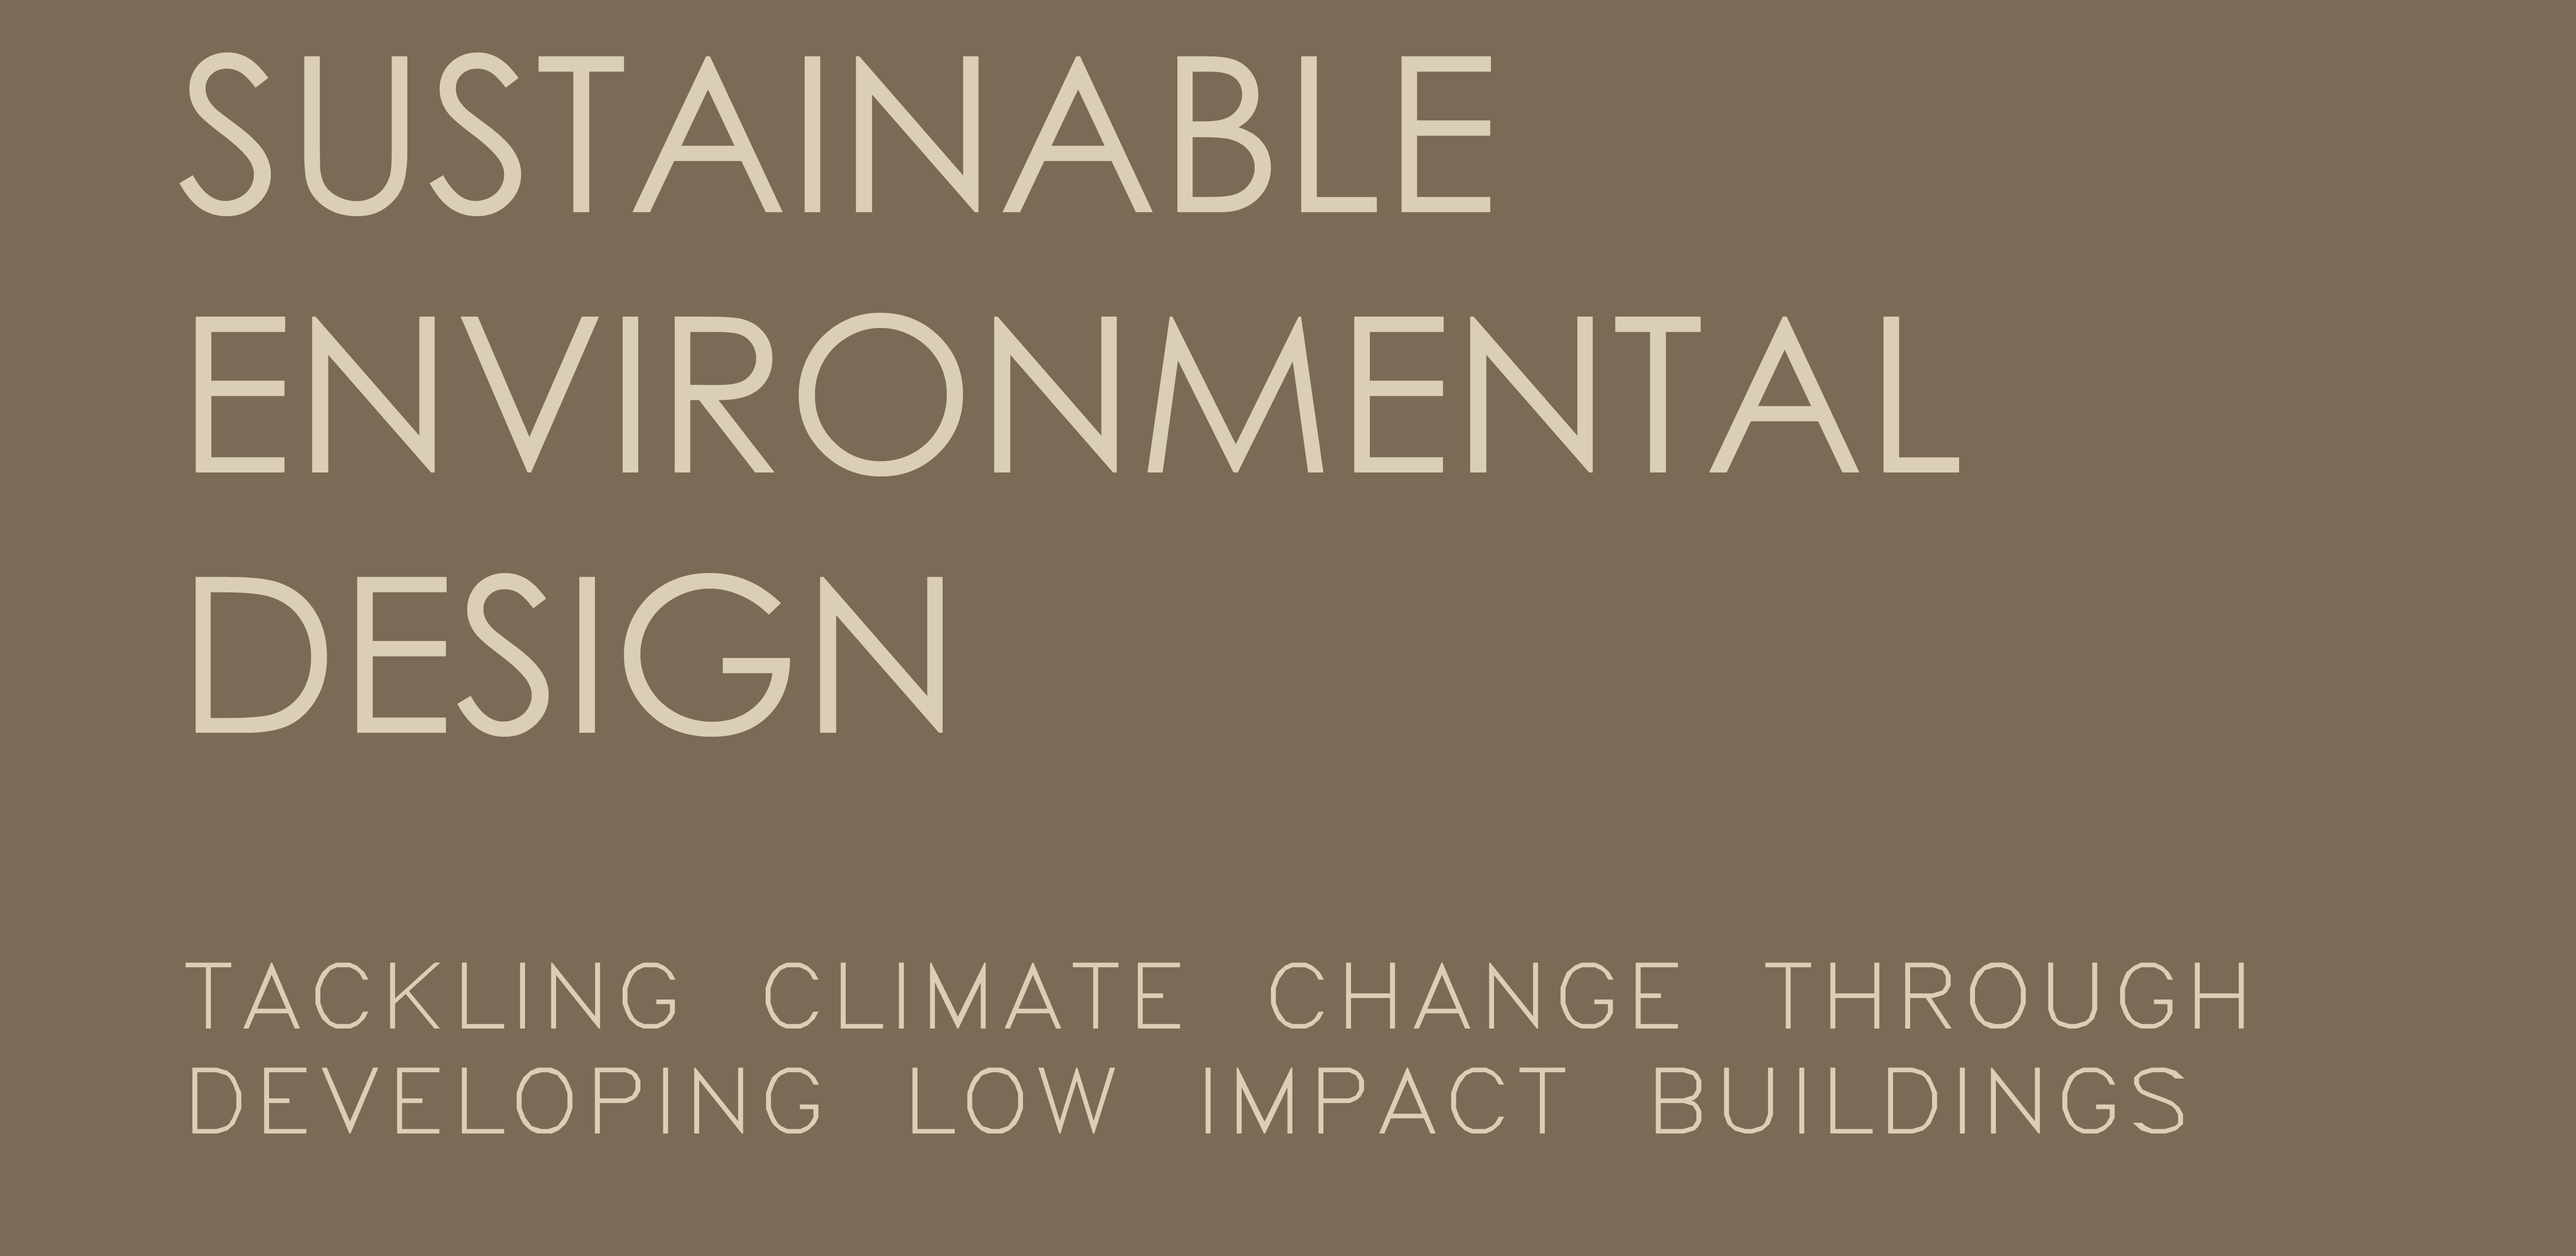 Sustainable Environmental Design: Tackling Climate Change Through Developing Low Impact Buildings